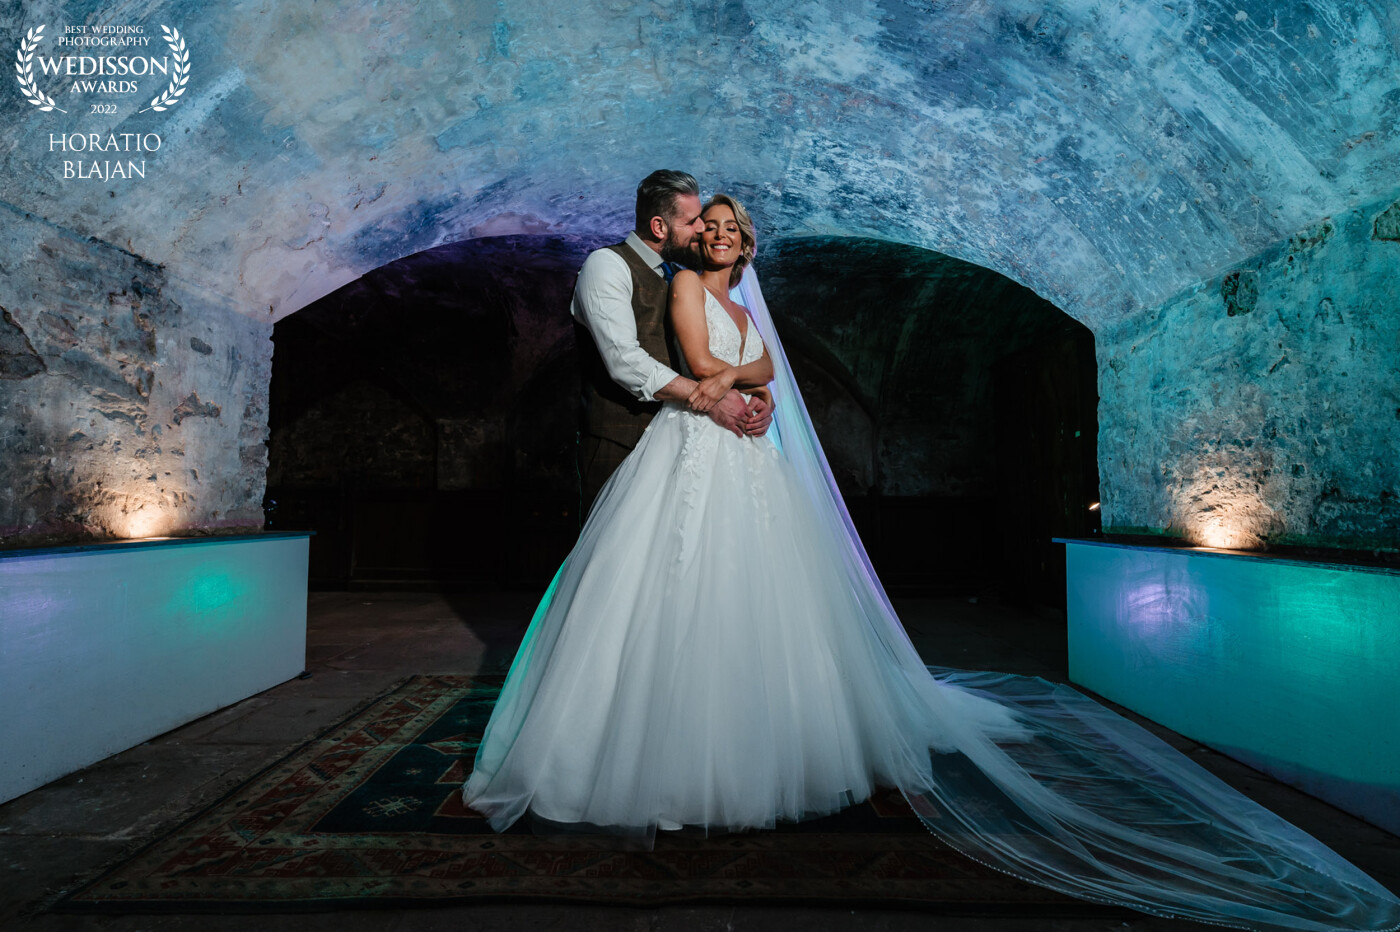 Gemma and Sam were the perfect bride and groom. You can see that they love each other by the look in their eyes. I have had the privilege to capture their images and create the one above in a dark environment by adding lots of colour and light.